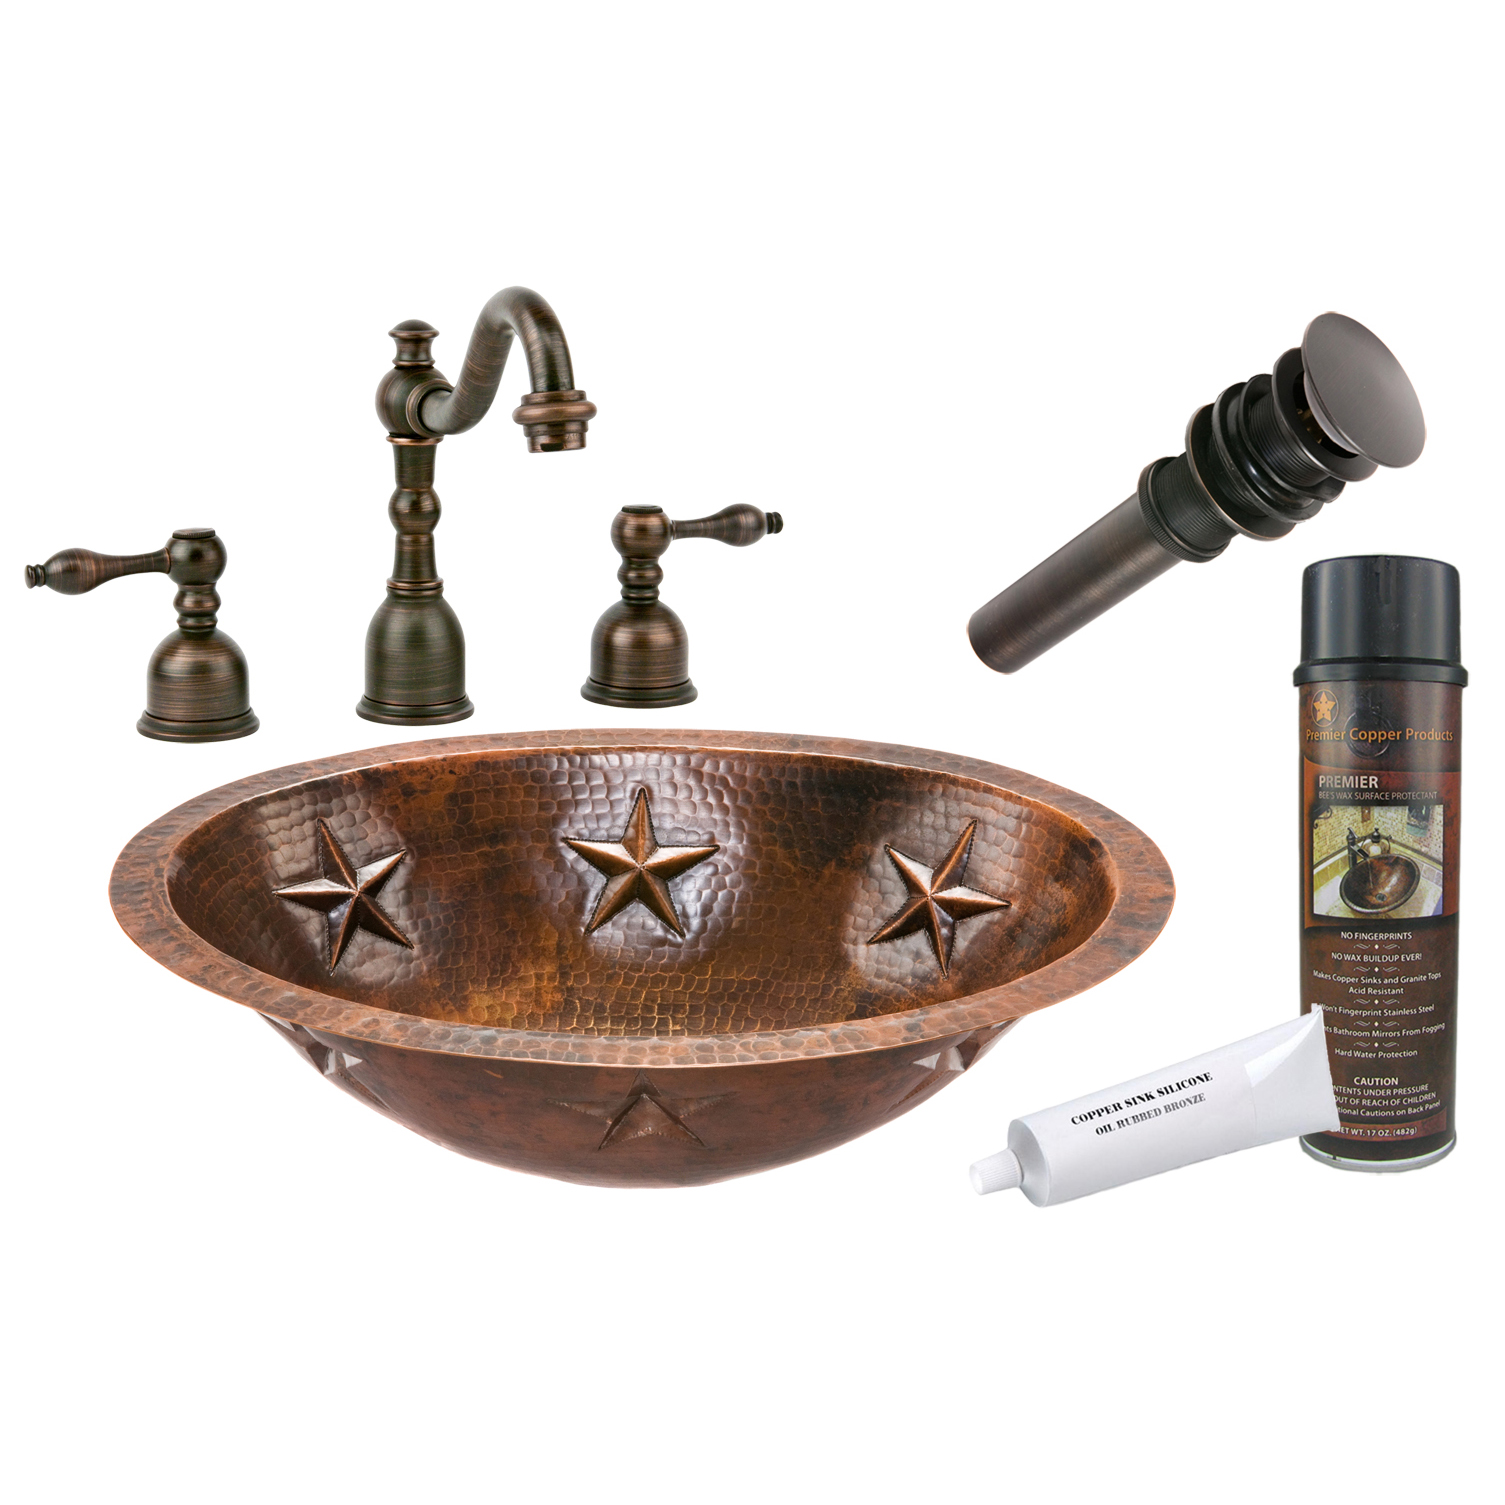 Oval Star Under Counter Hammered Copper Bathroom Sink, Faucet And Accessories Package, Oil Rubbed Bronze